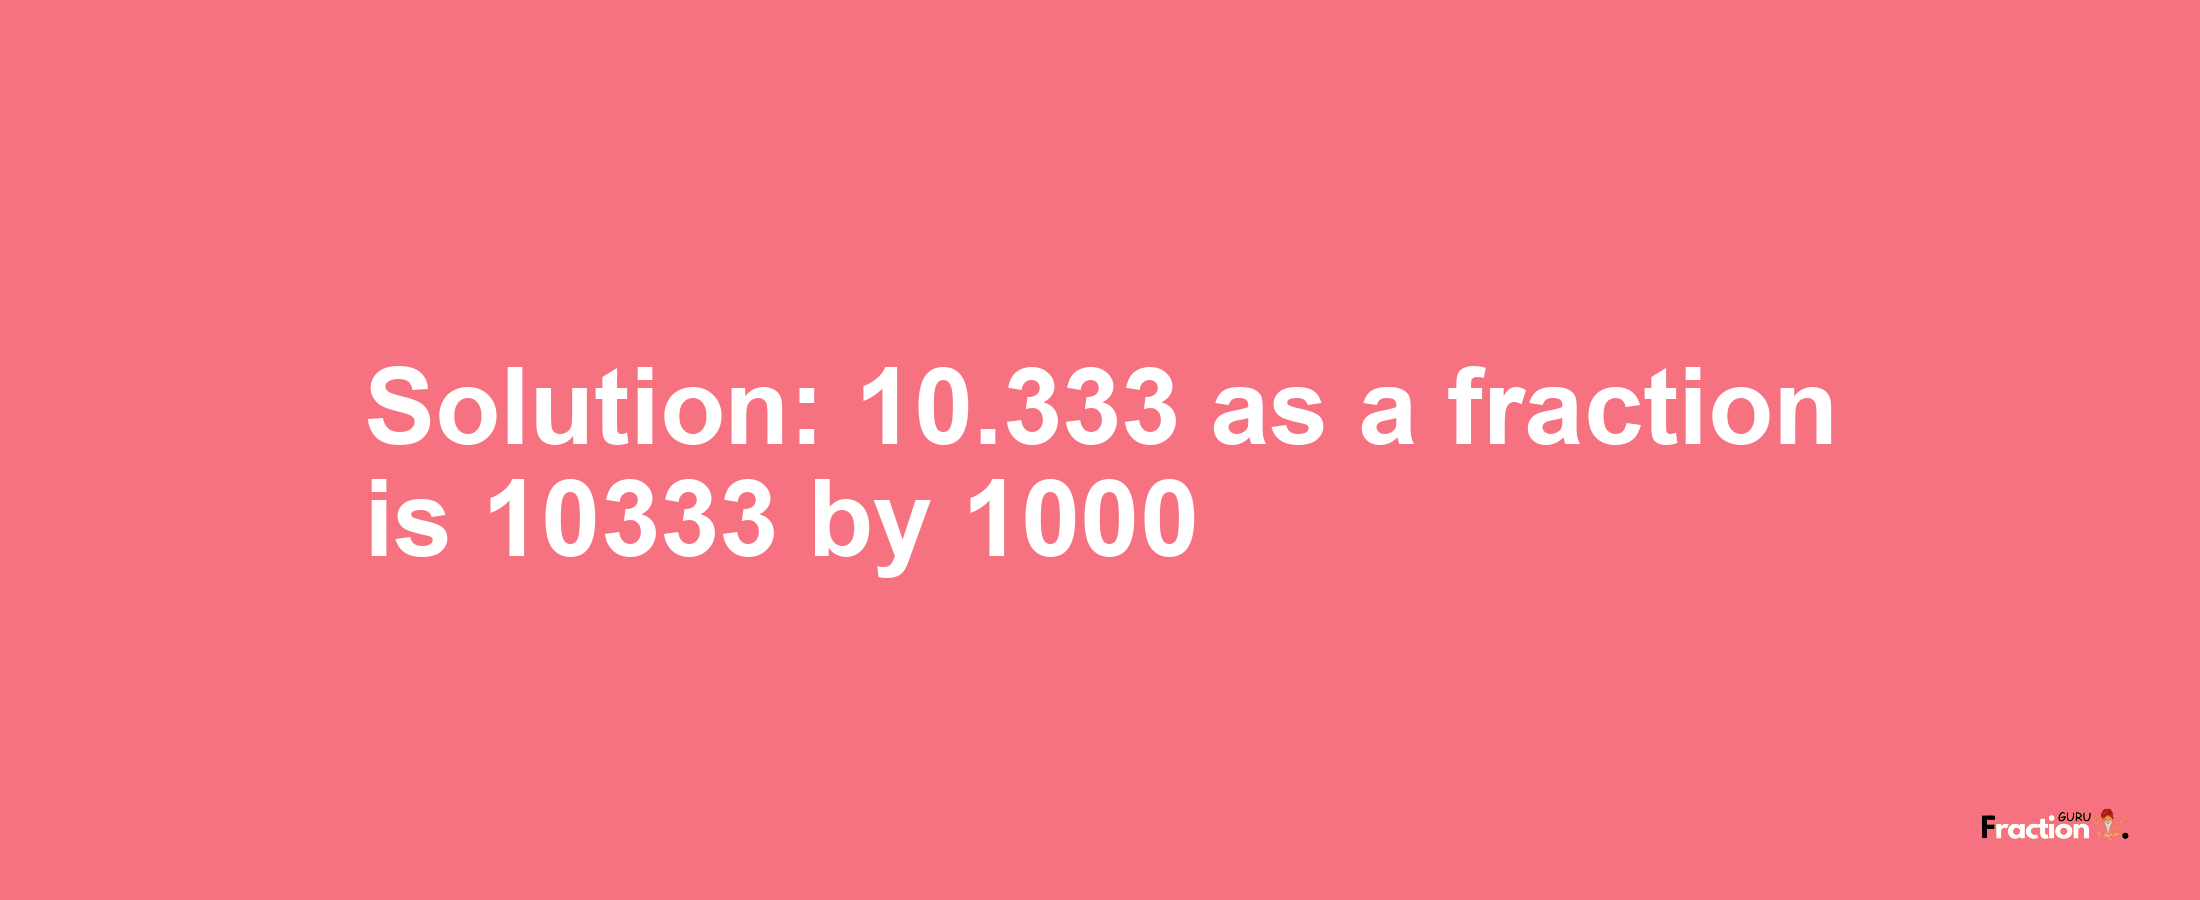 Solution:10.333 as a fraction is 10333/1000